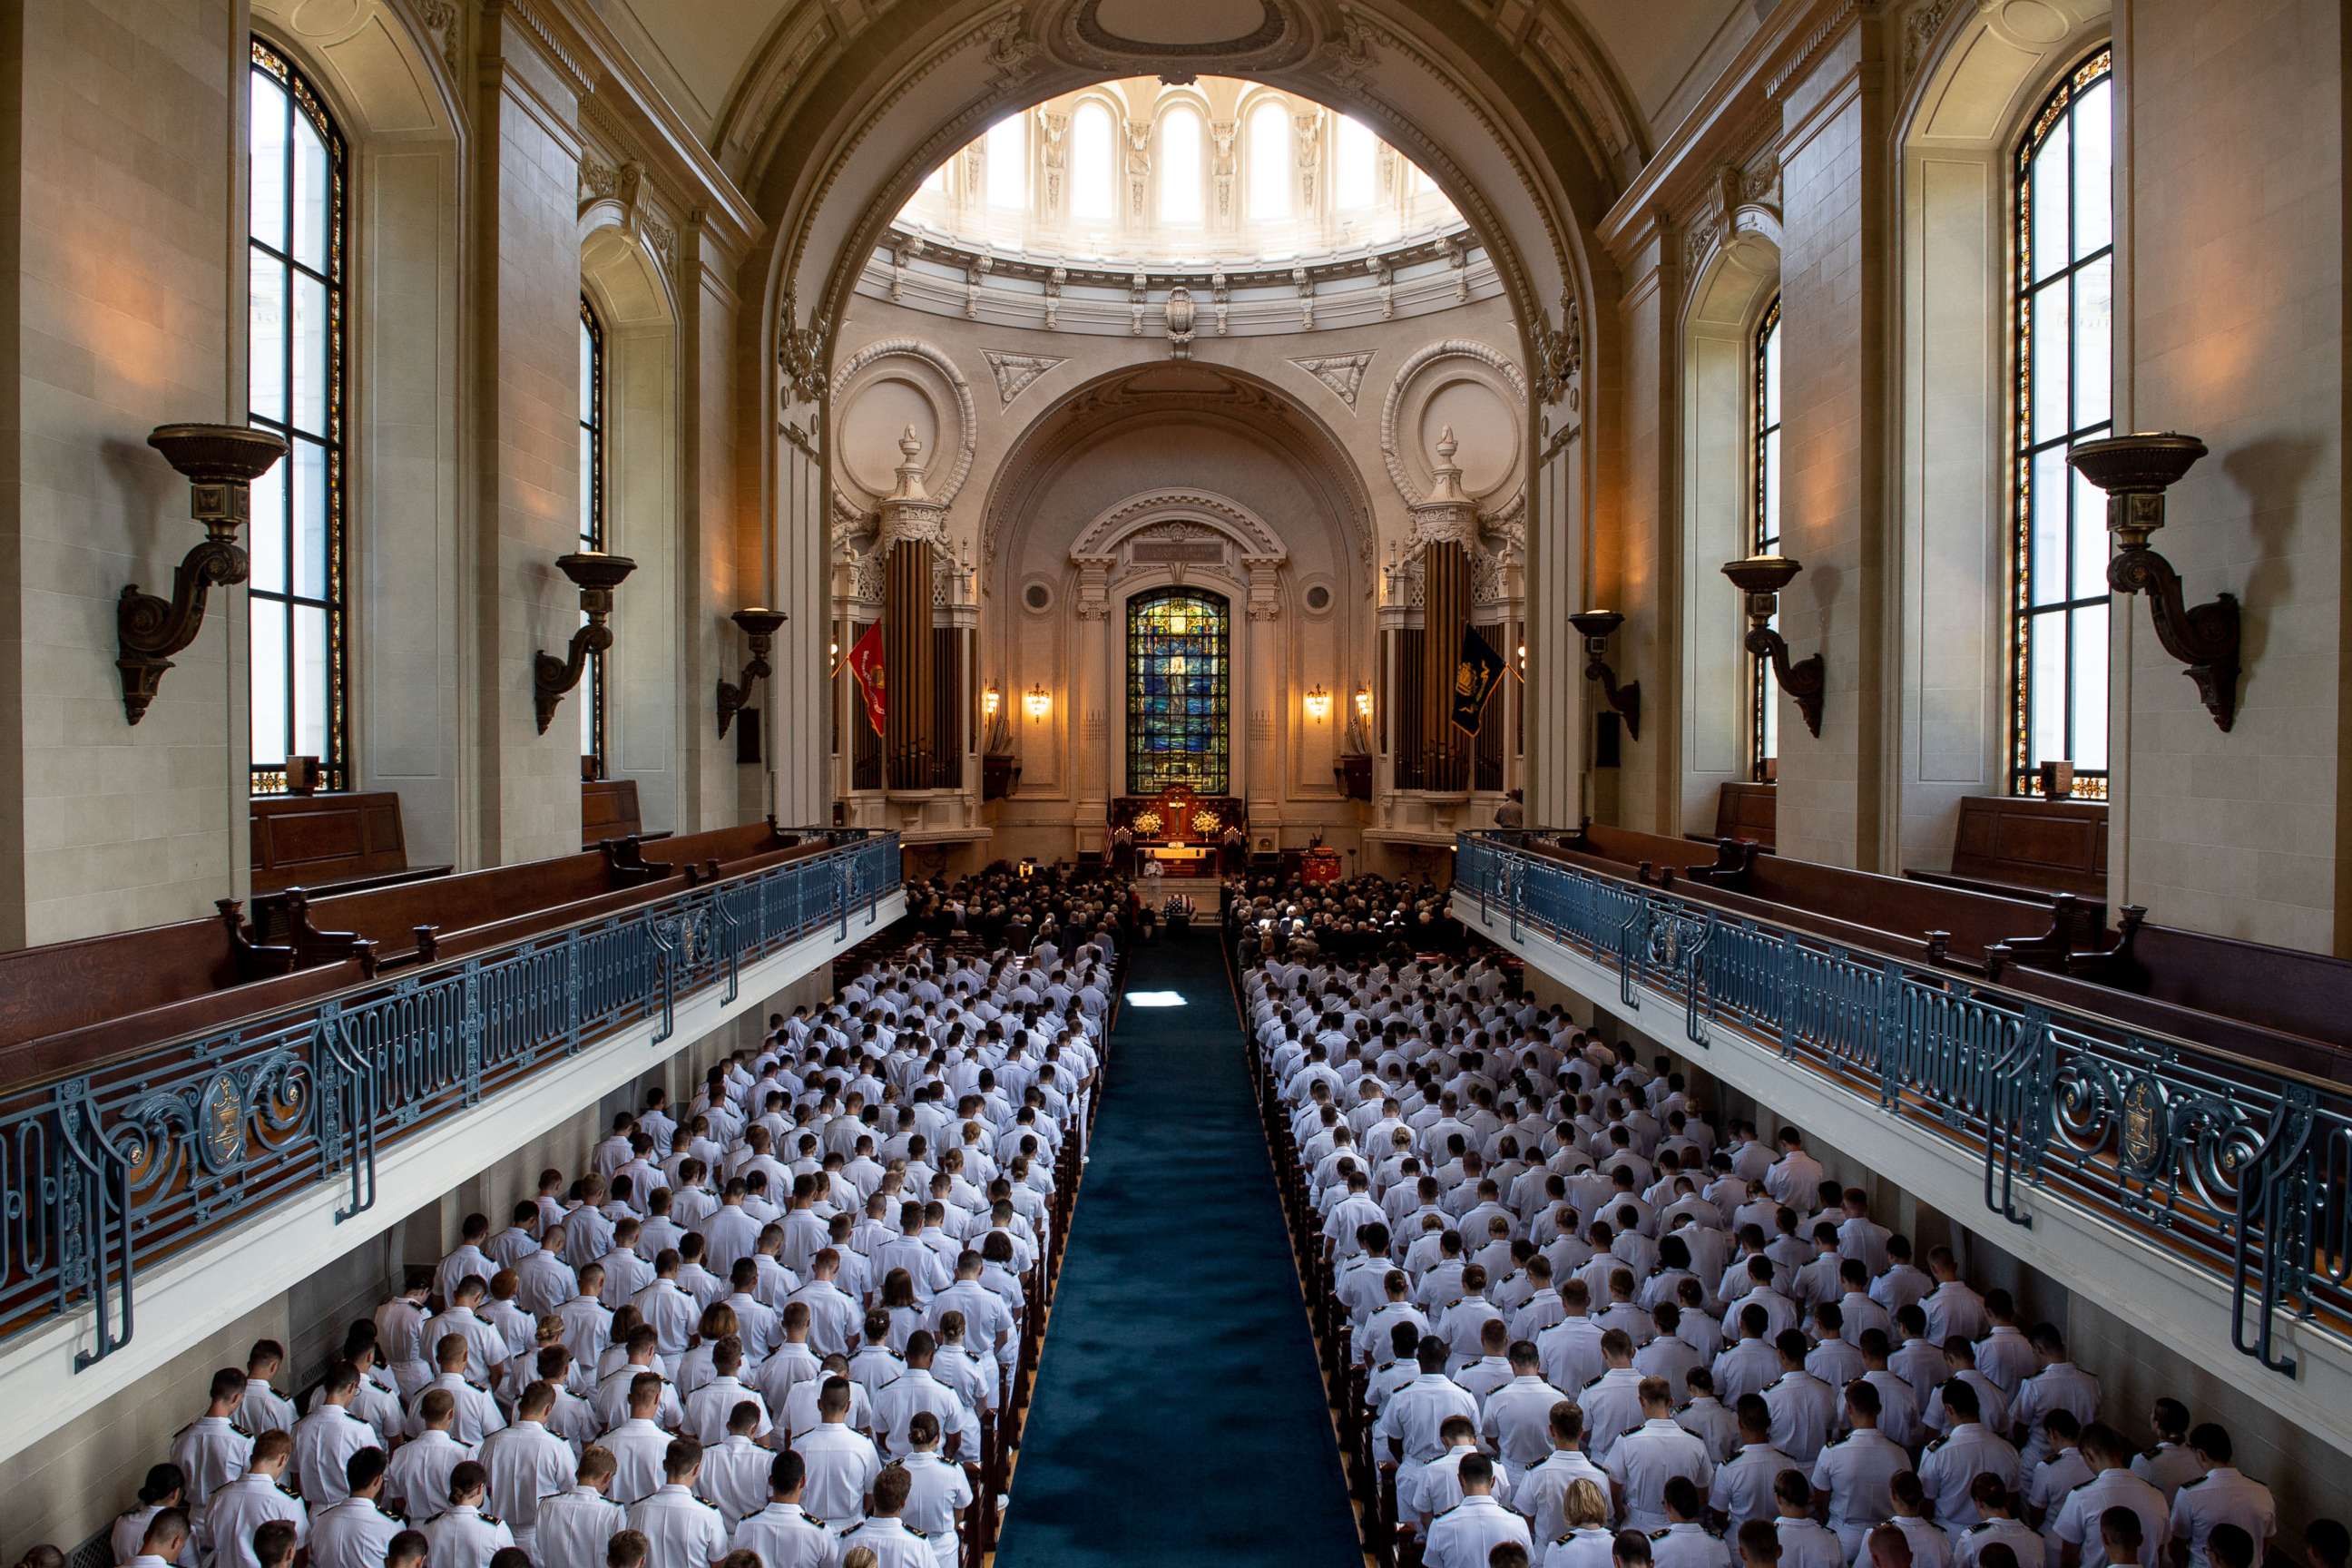 The funeral service for the late Sen. John McCain at the United States Naval Academy Chapel, Sept. 2, 2018. John Sidney McCain, III graduated from the United States Naval Academy in 1958. 